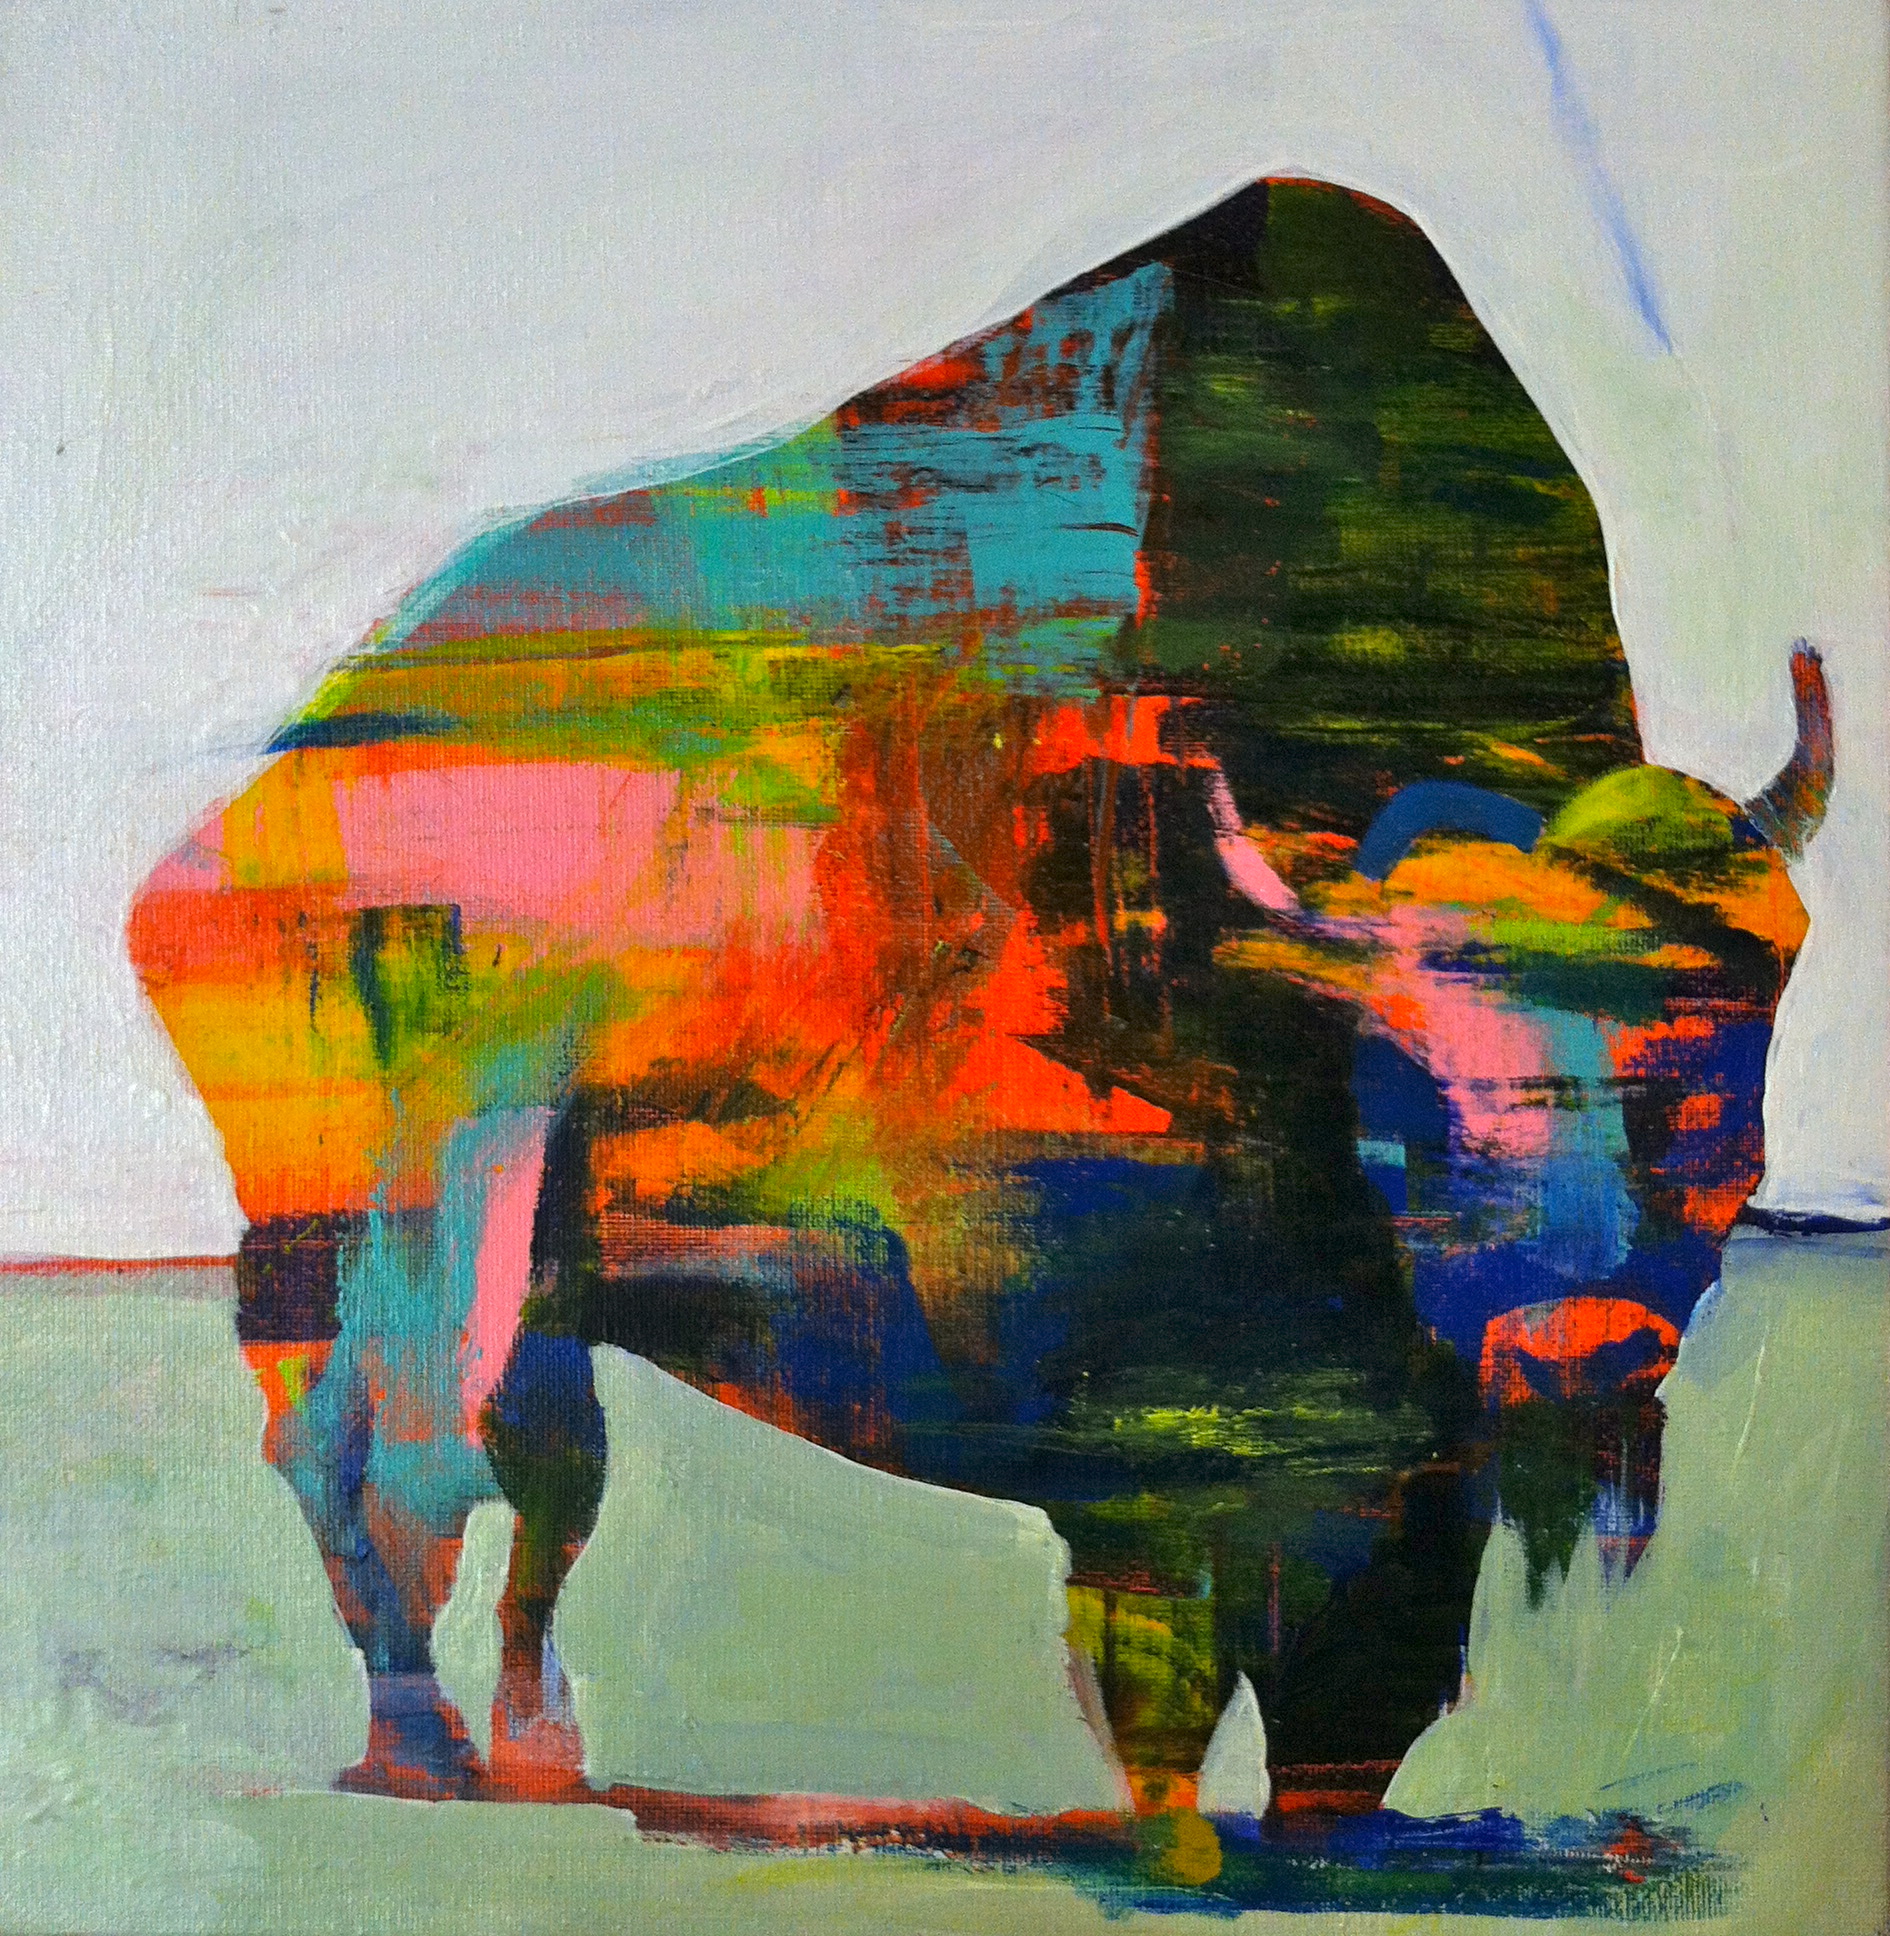  Bison in white, acrylic on canvas, 12x12 inches, 2015 